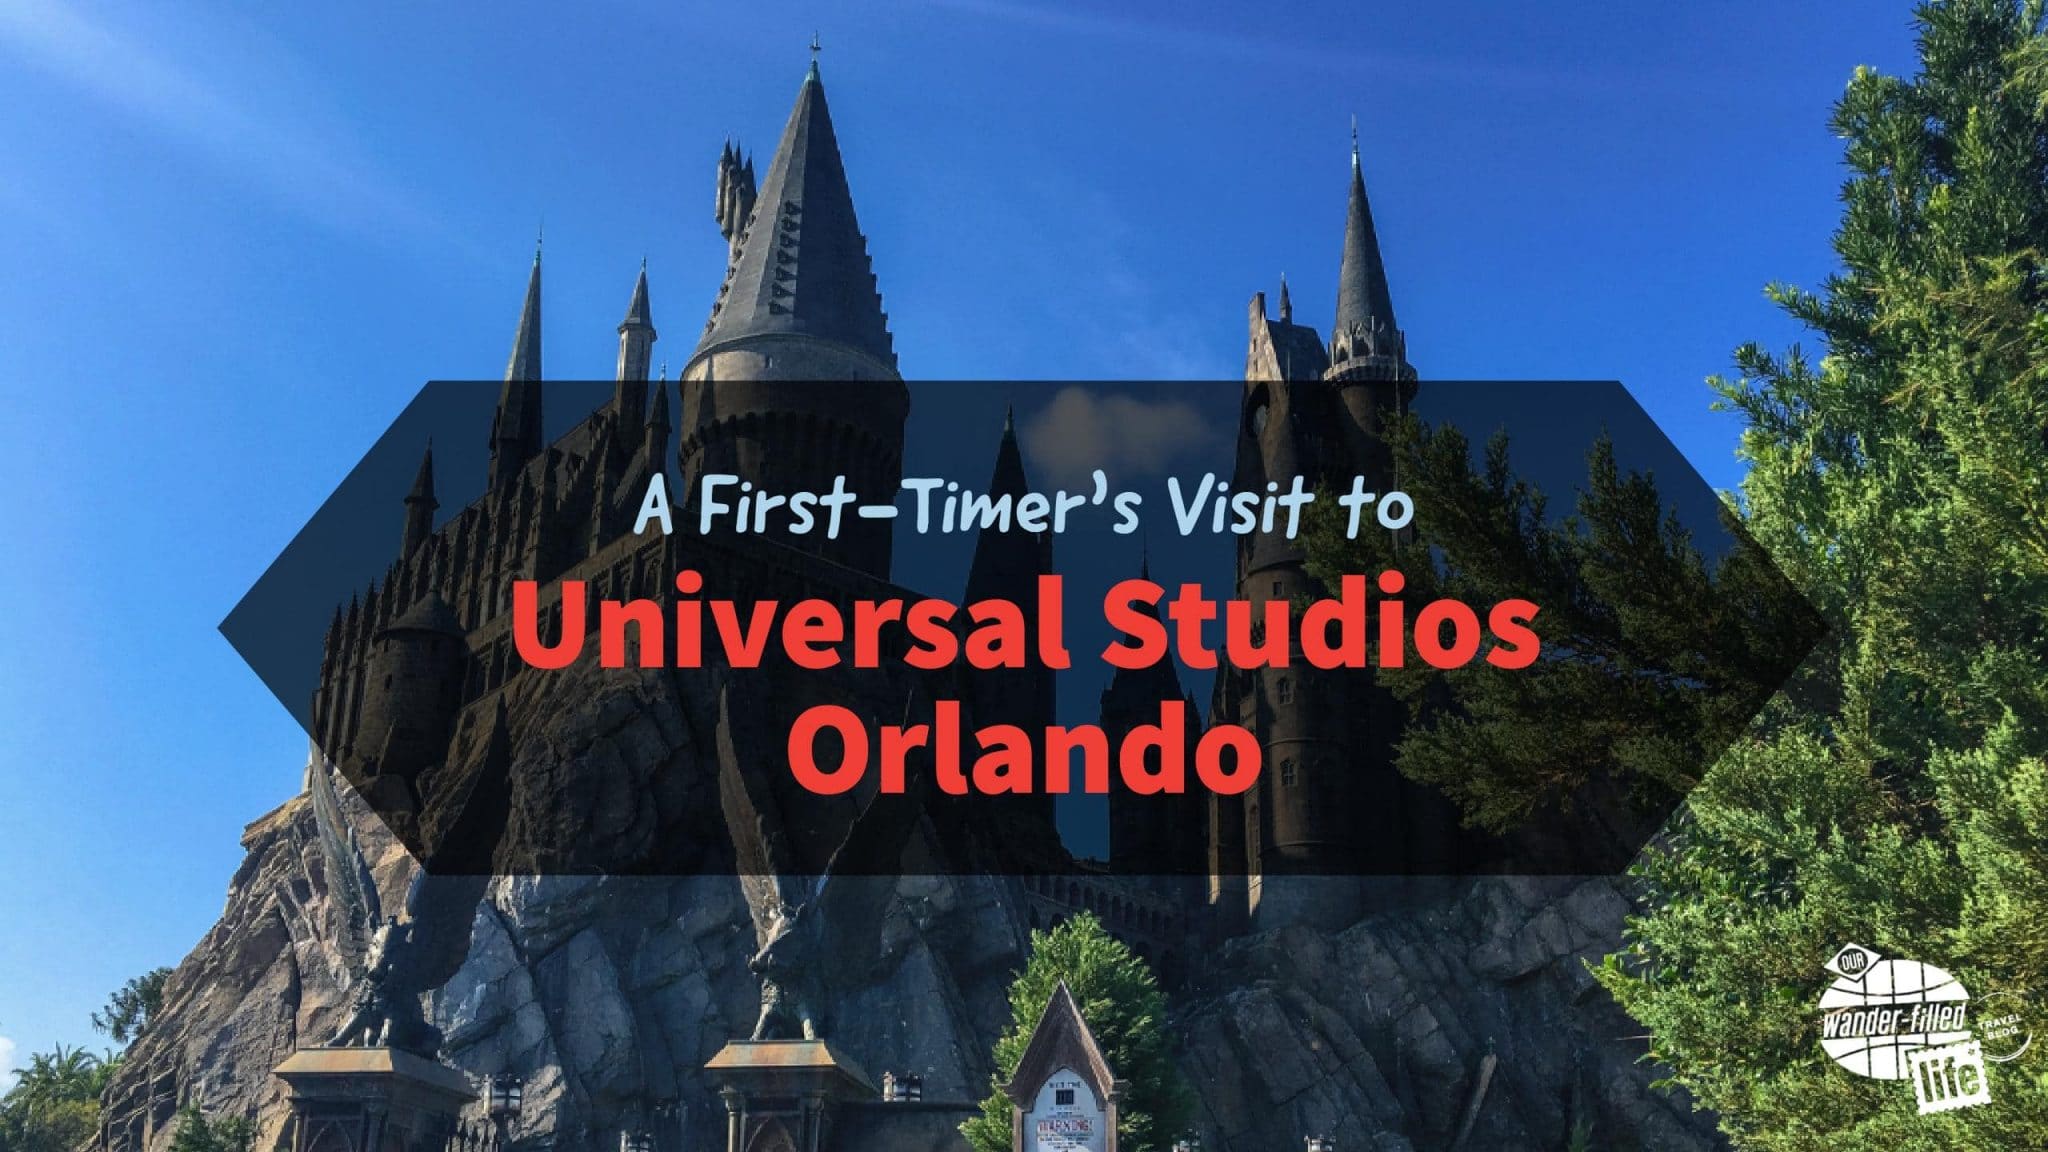 A First-Timer's Visit to Universal Studios Orlando